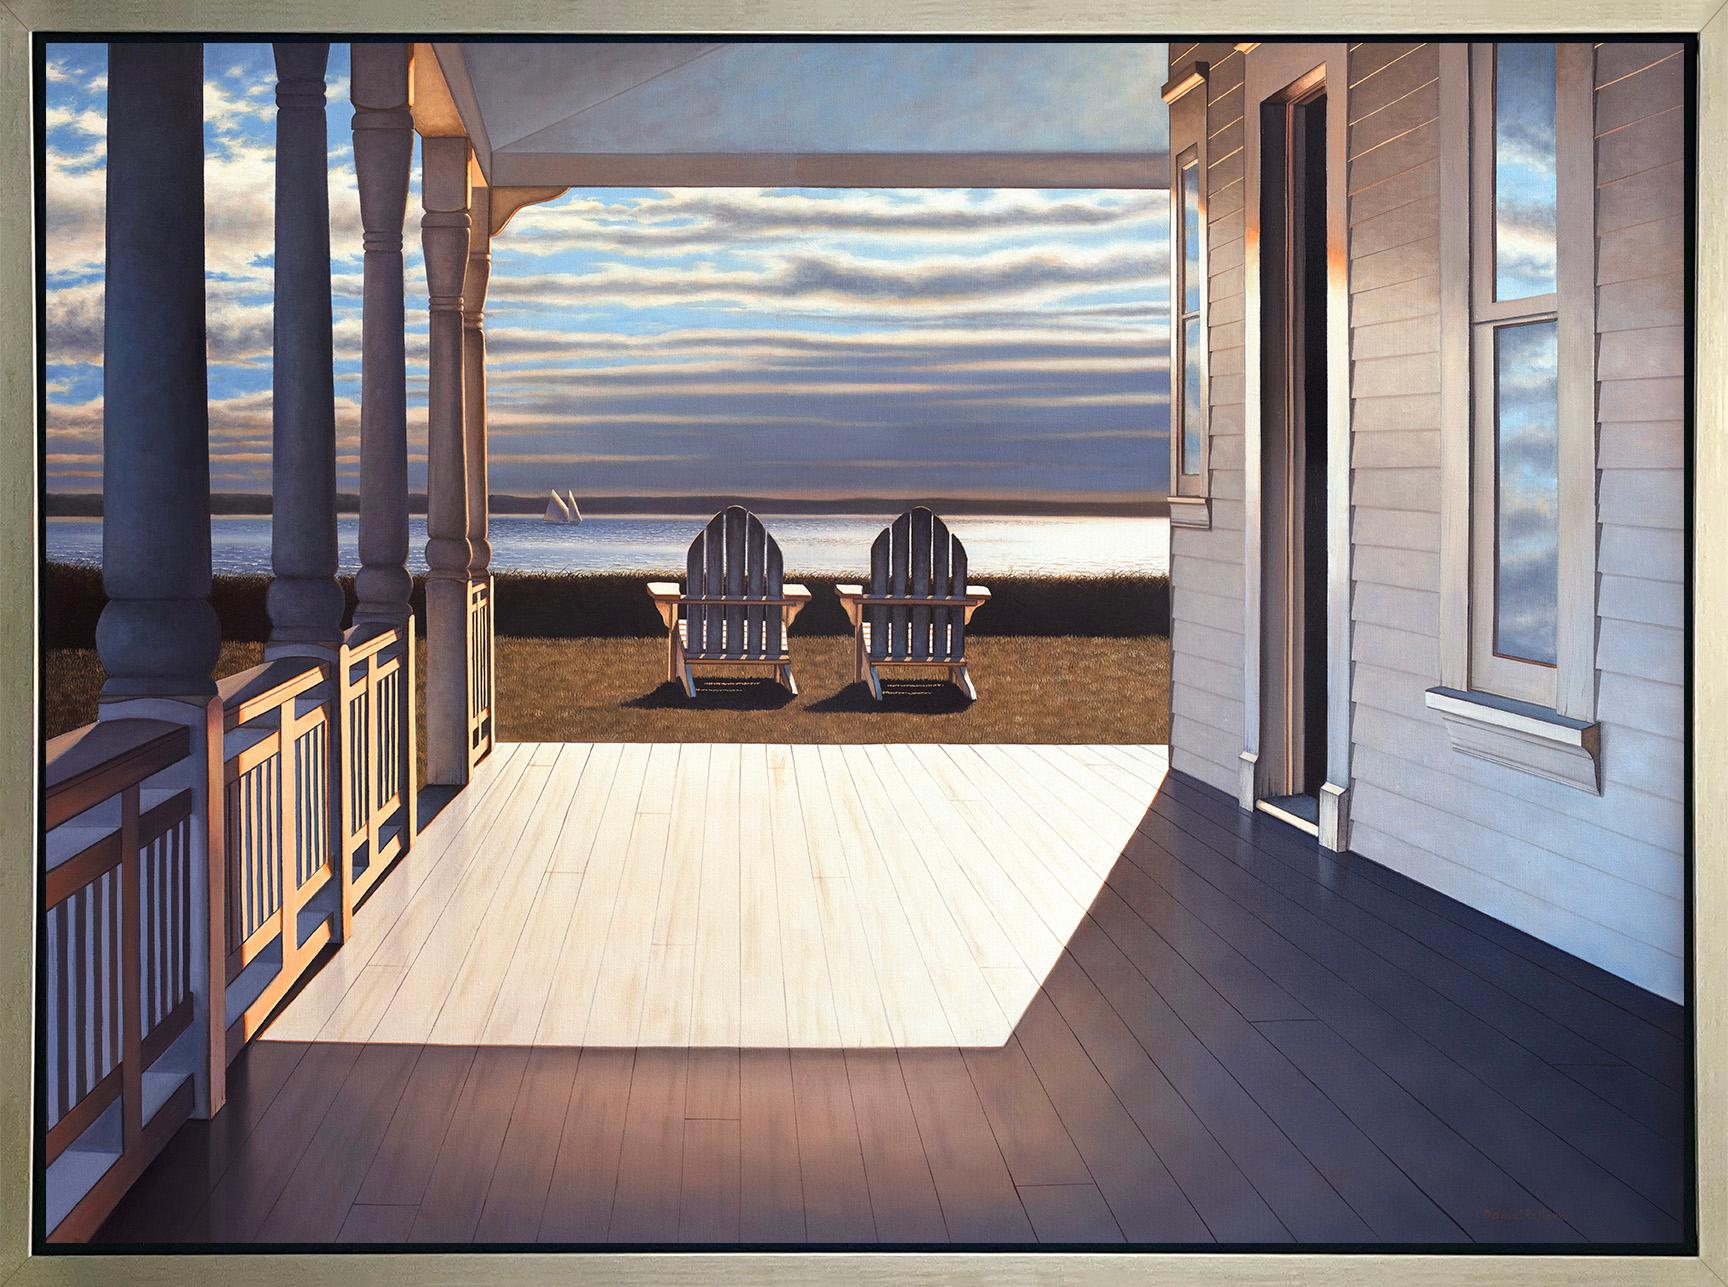 Daniel Pollera Landscape Print - "Passing Time, " Framed Limited Edition Giclee Print, 36" x 48"